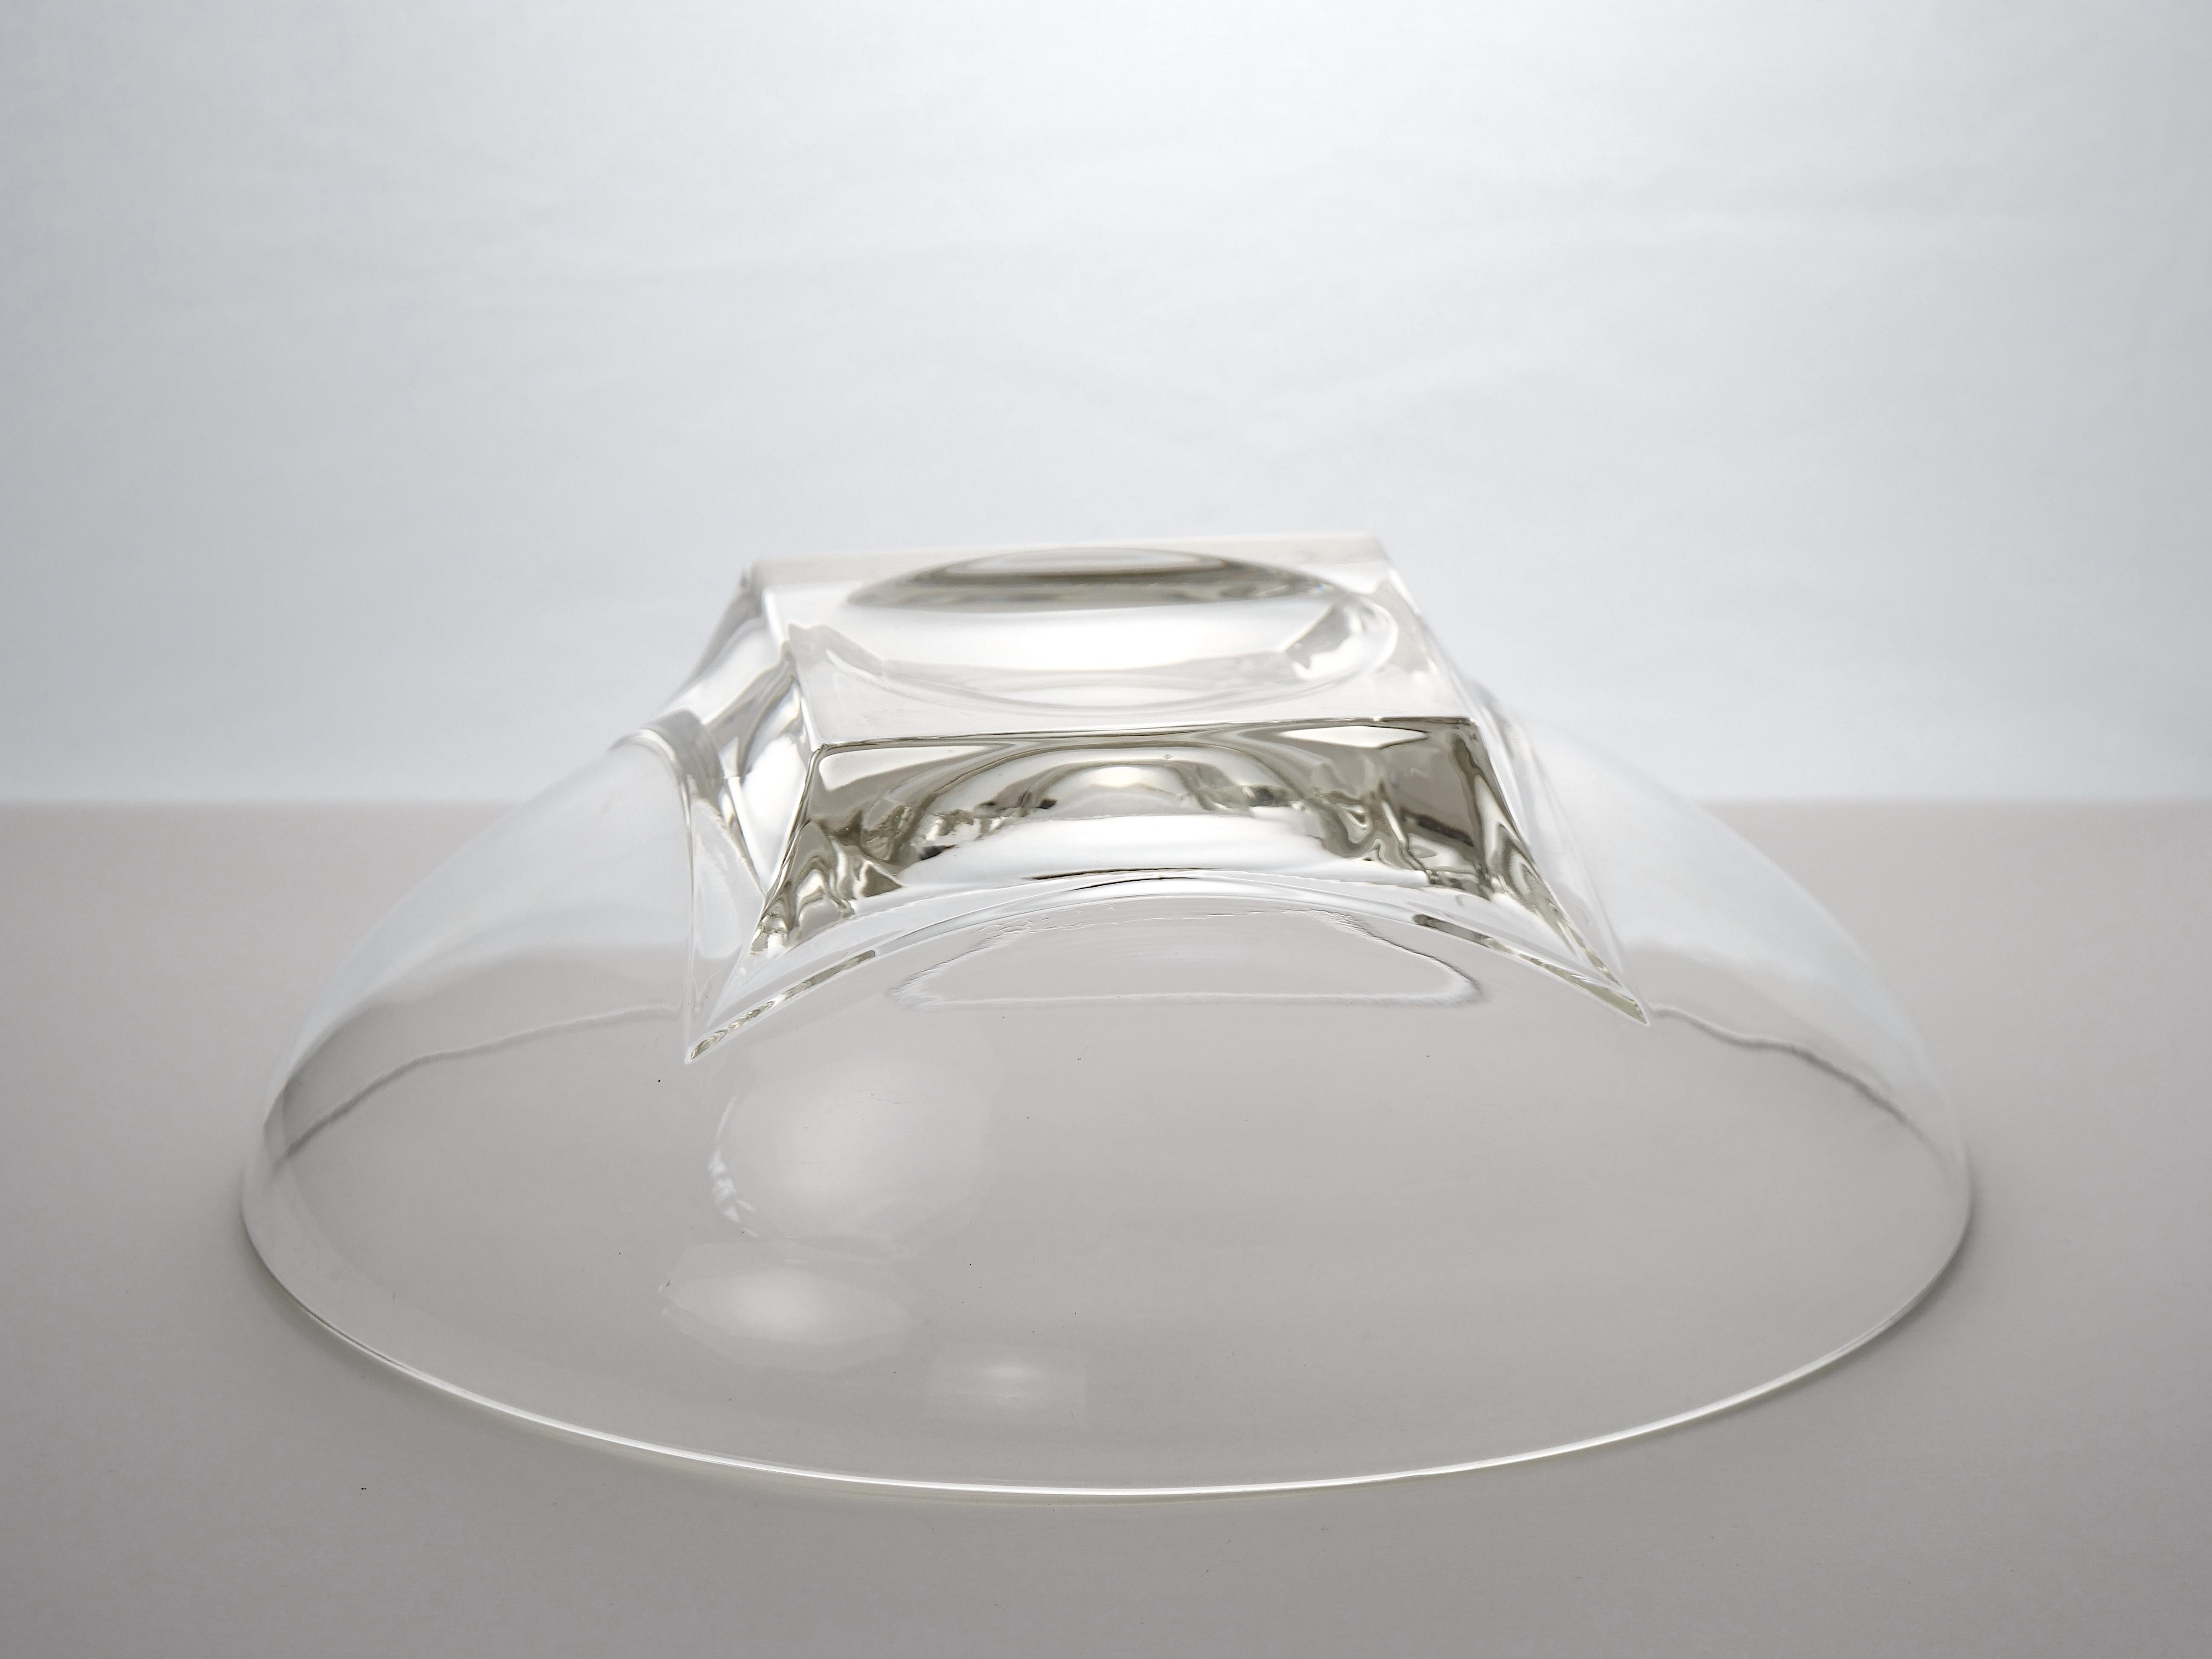 French Mid-Century Modern Art Deco Style Glass Centerpiece Bowl For Sale 3